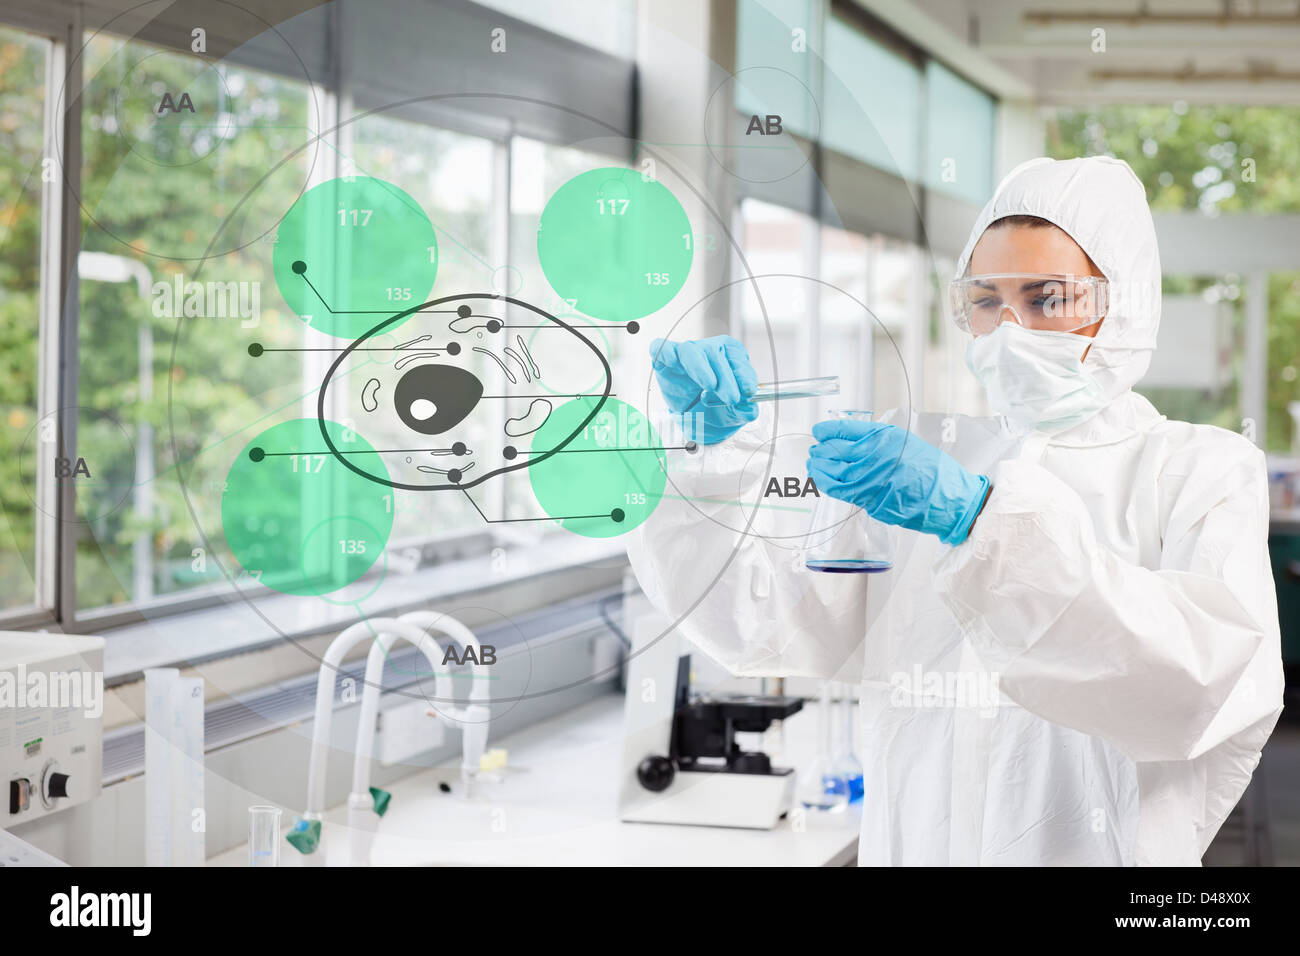 Scientist in protective suit working with green cell diagram interface Stock Photo